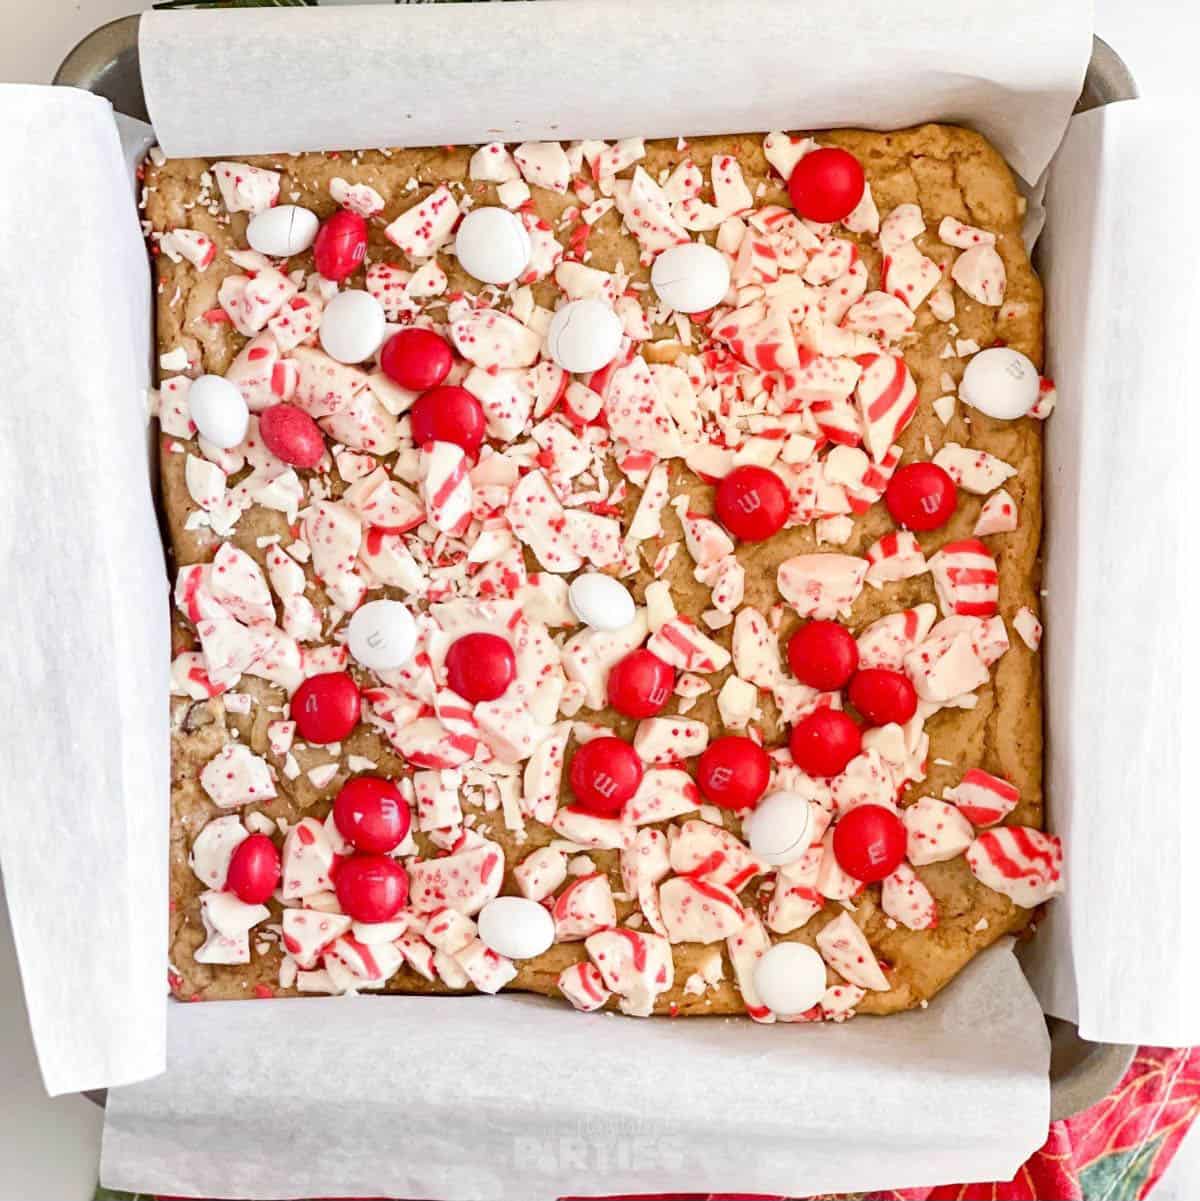 A pan of peppermint blondies right out of the oven.